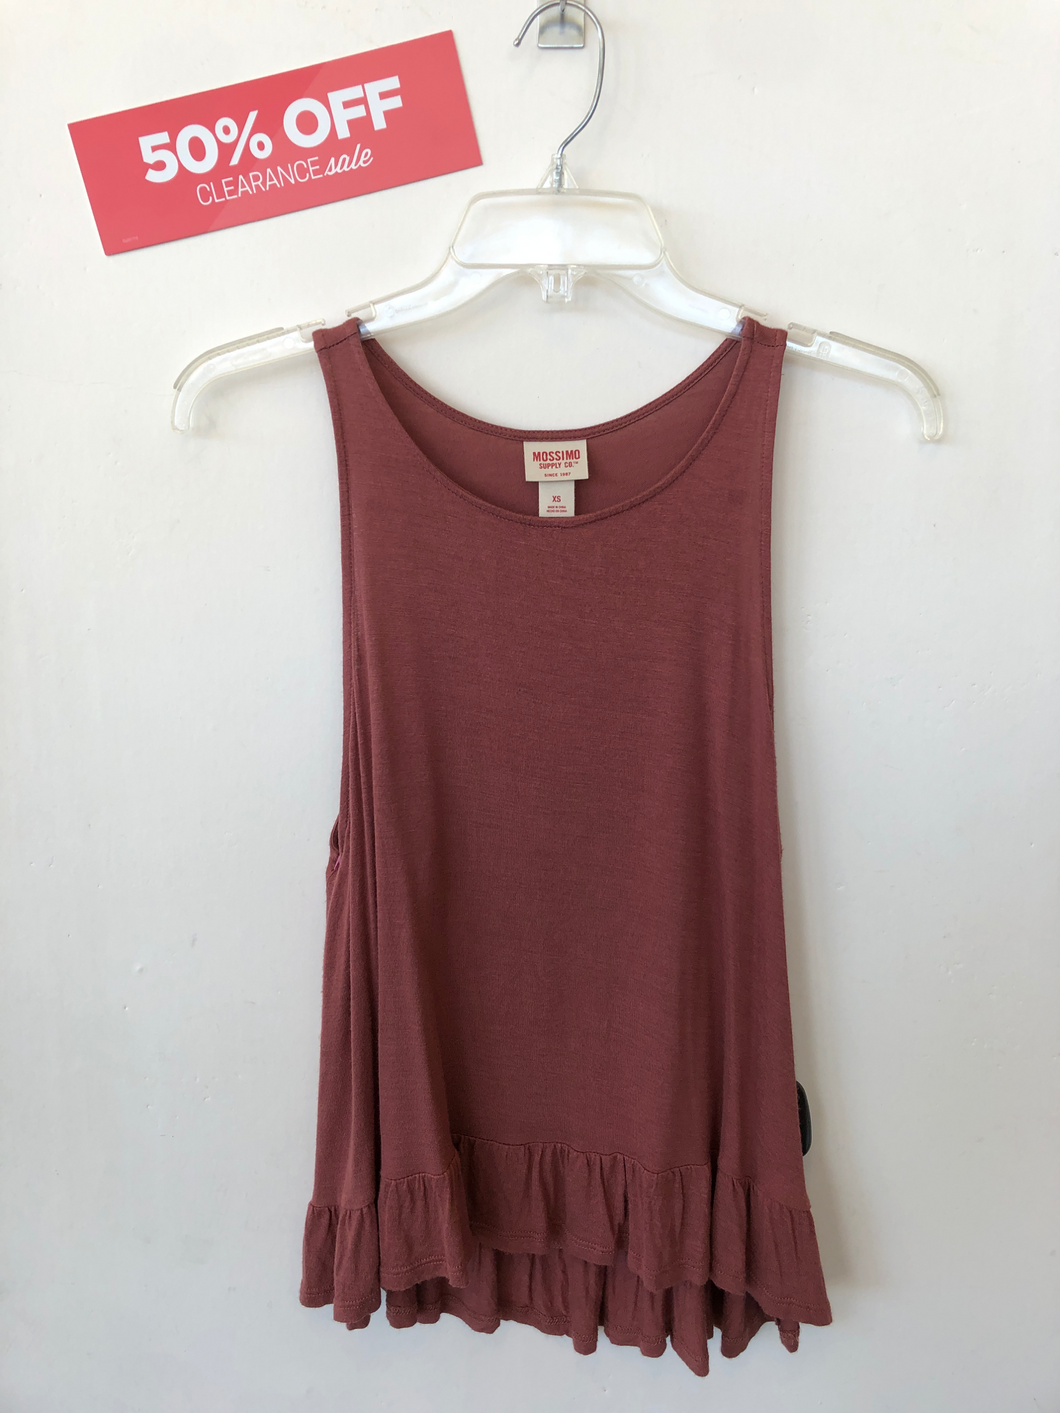 Mossimo Tank Top Size Extra Small